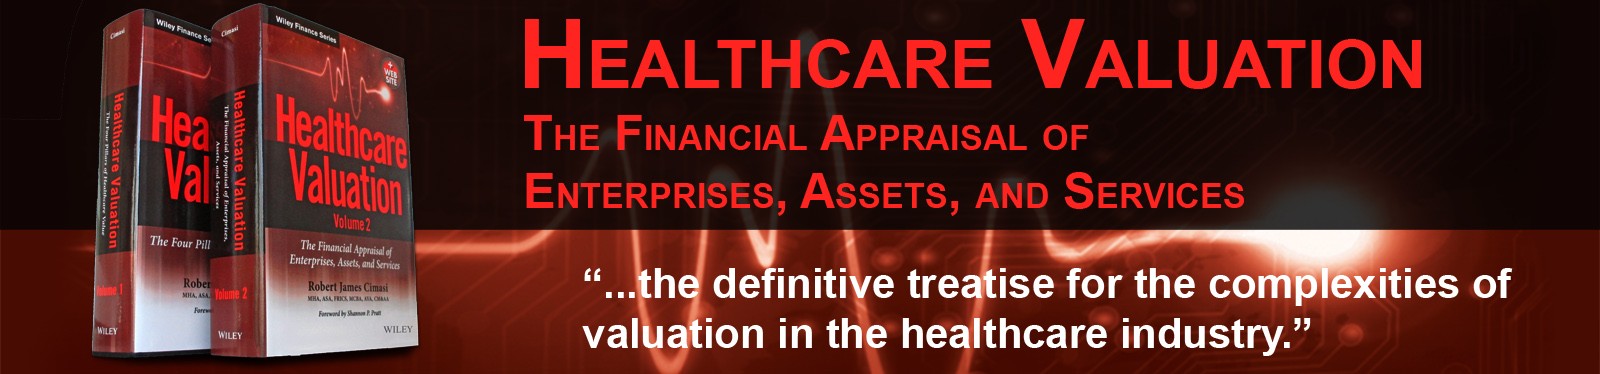 Healthcare Valuation Banner